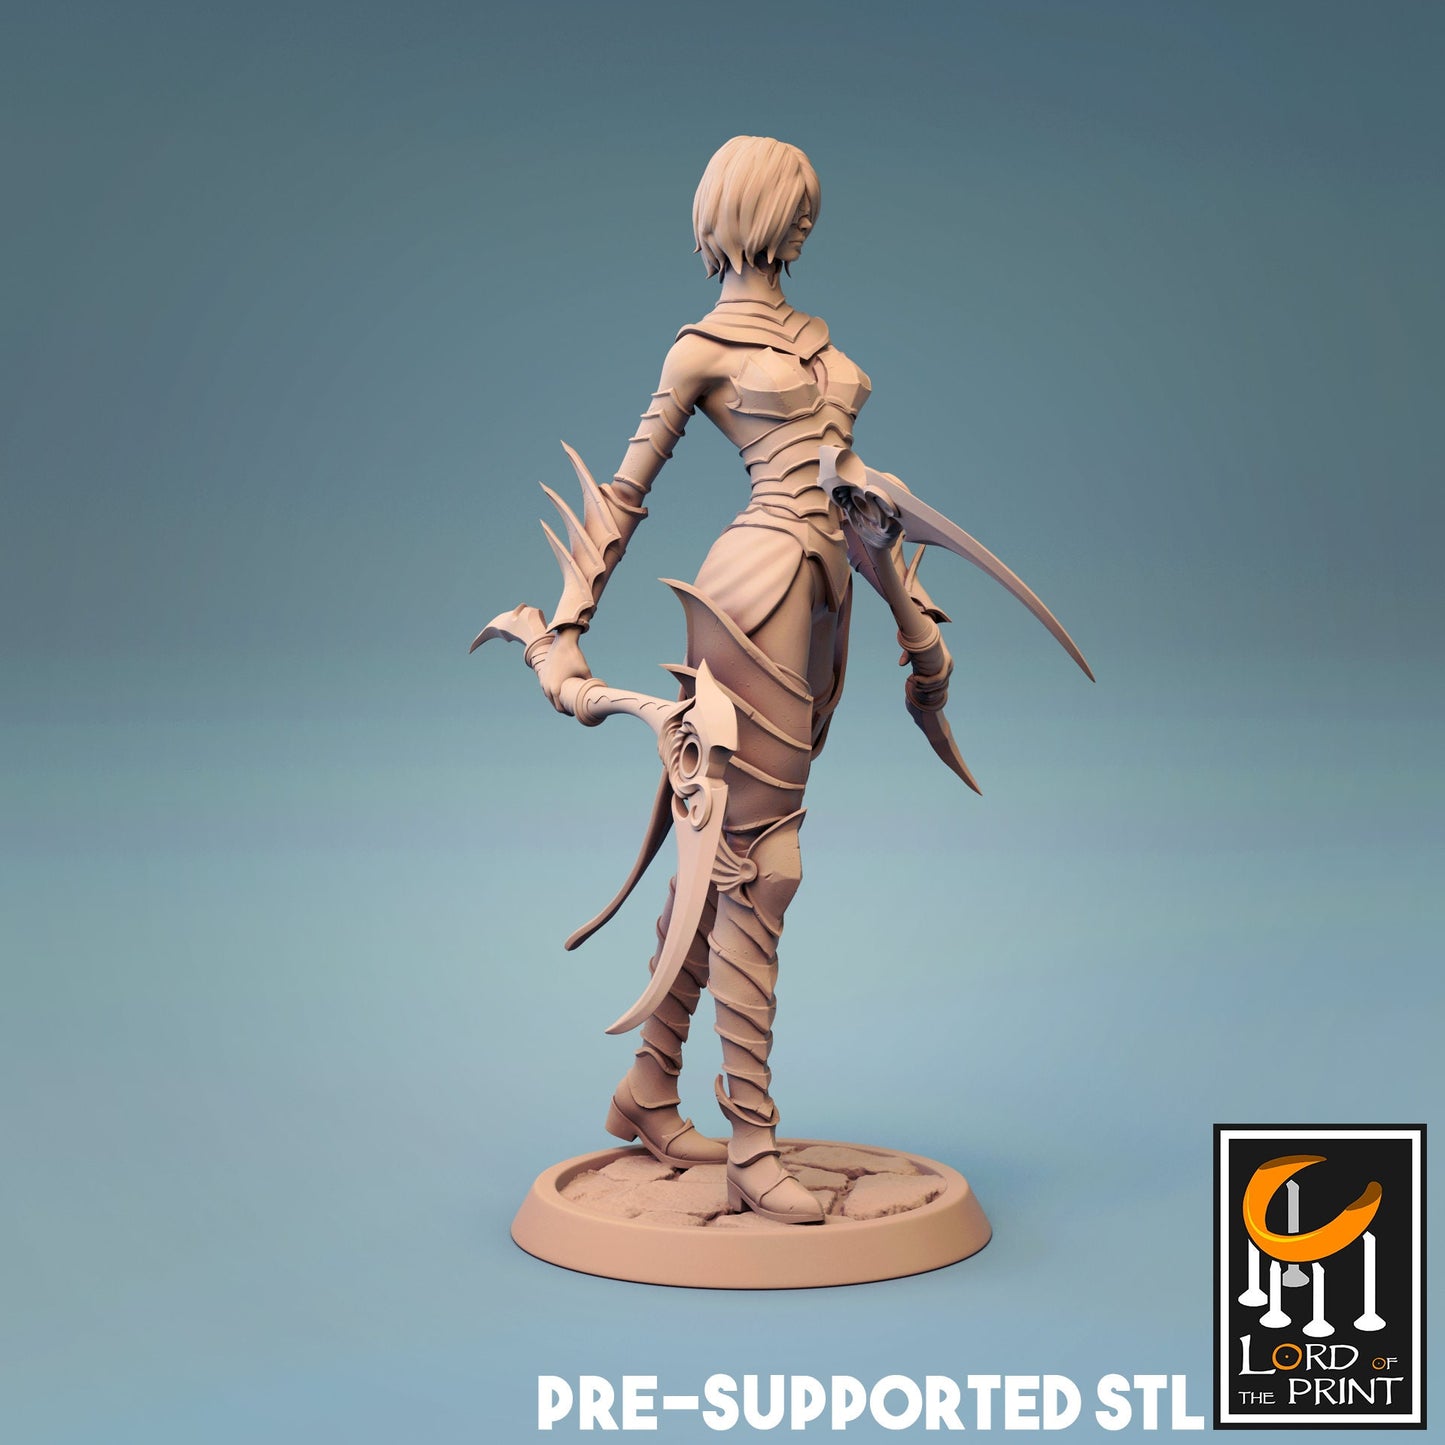 Female Human Fighter with dual Sickles D&D miniature, by Lord of the Print // 3D Print on Demand / DnD / Pathfinder / RPG